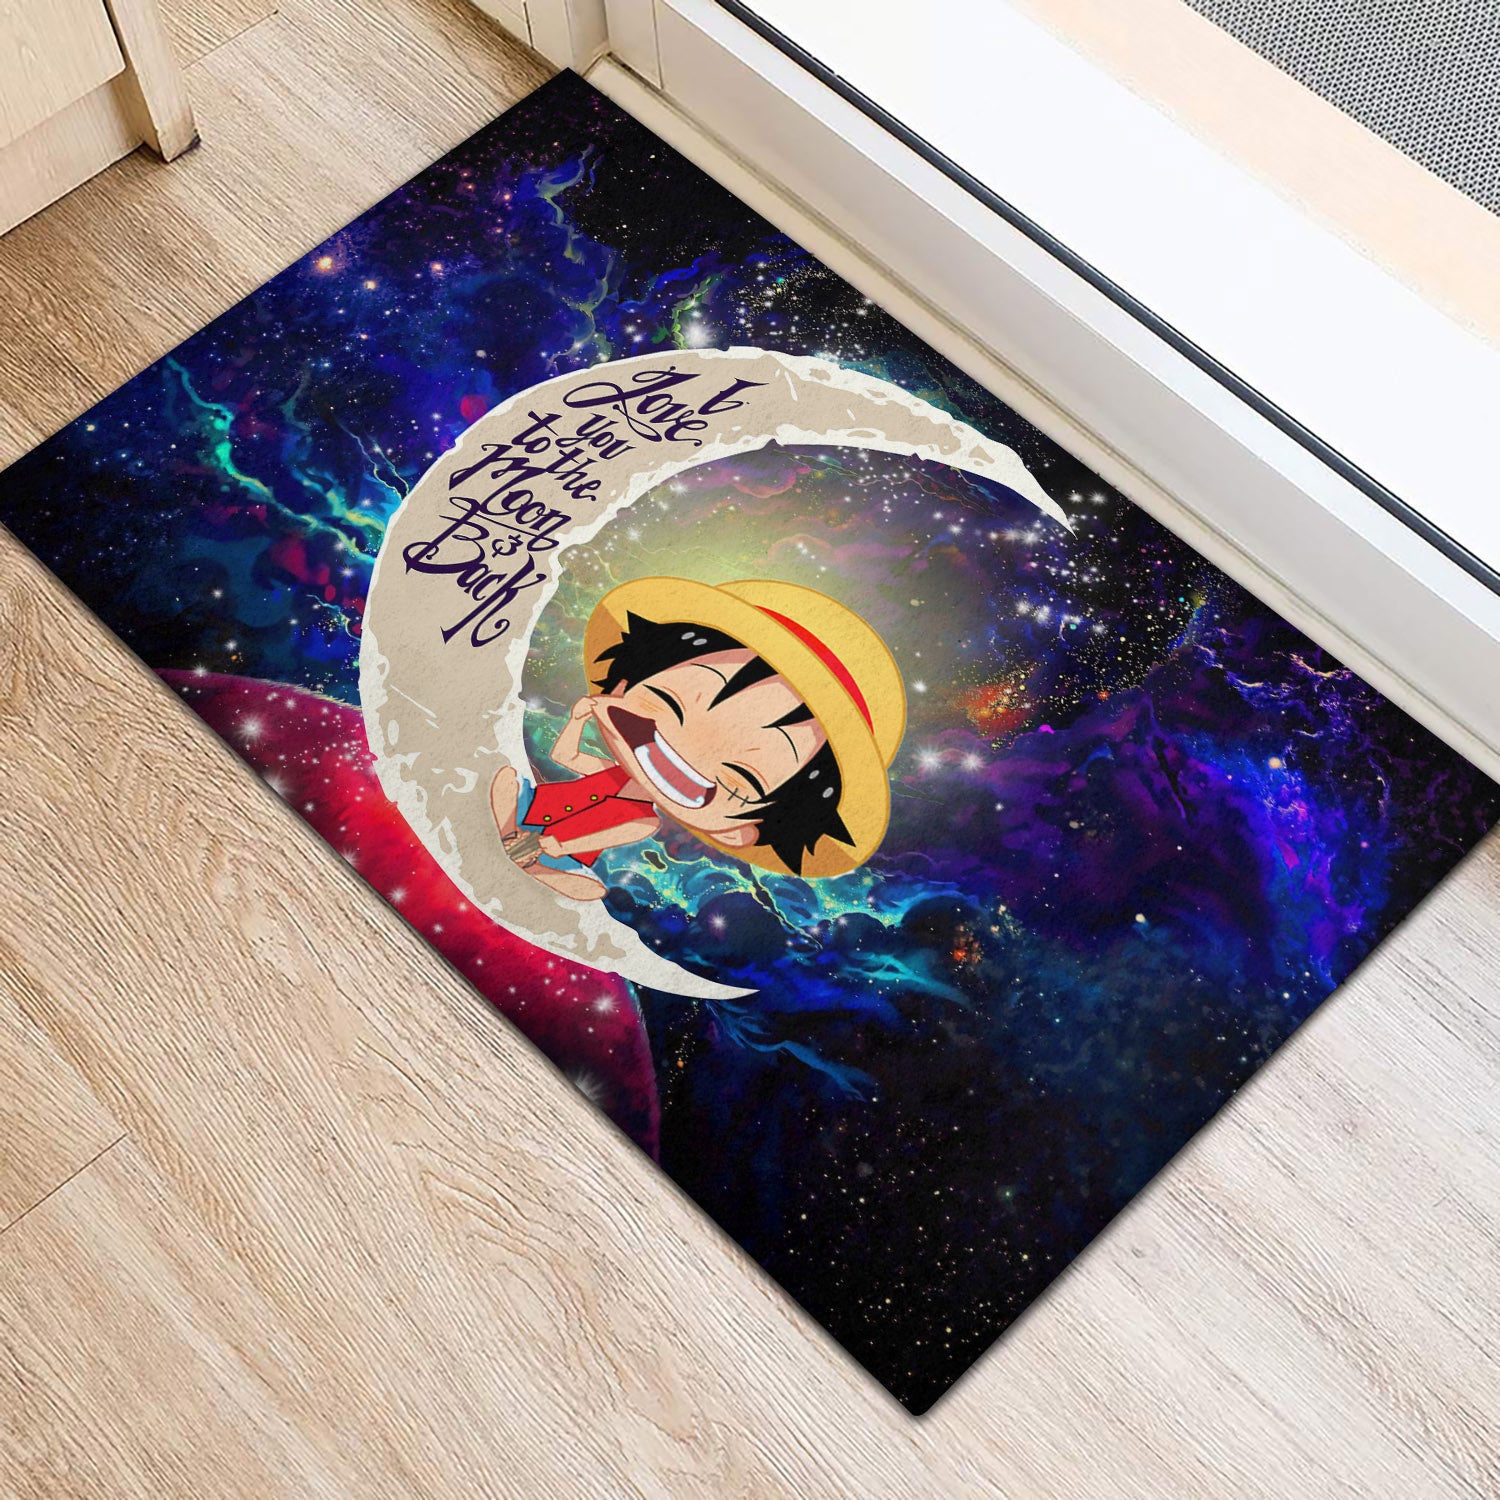 Luffy One Piece Love You To The Moon Galaxy Back Door Mats Home Decor